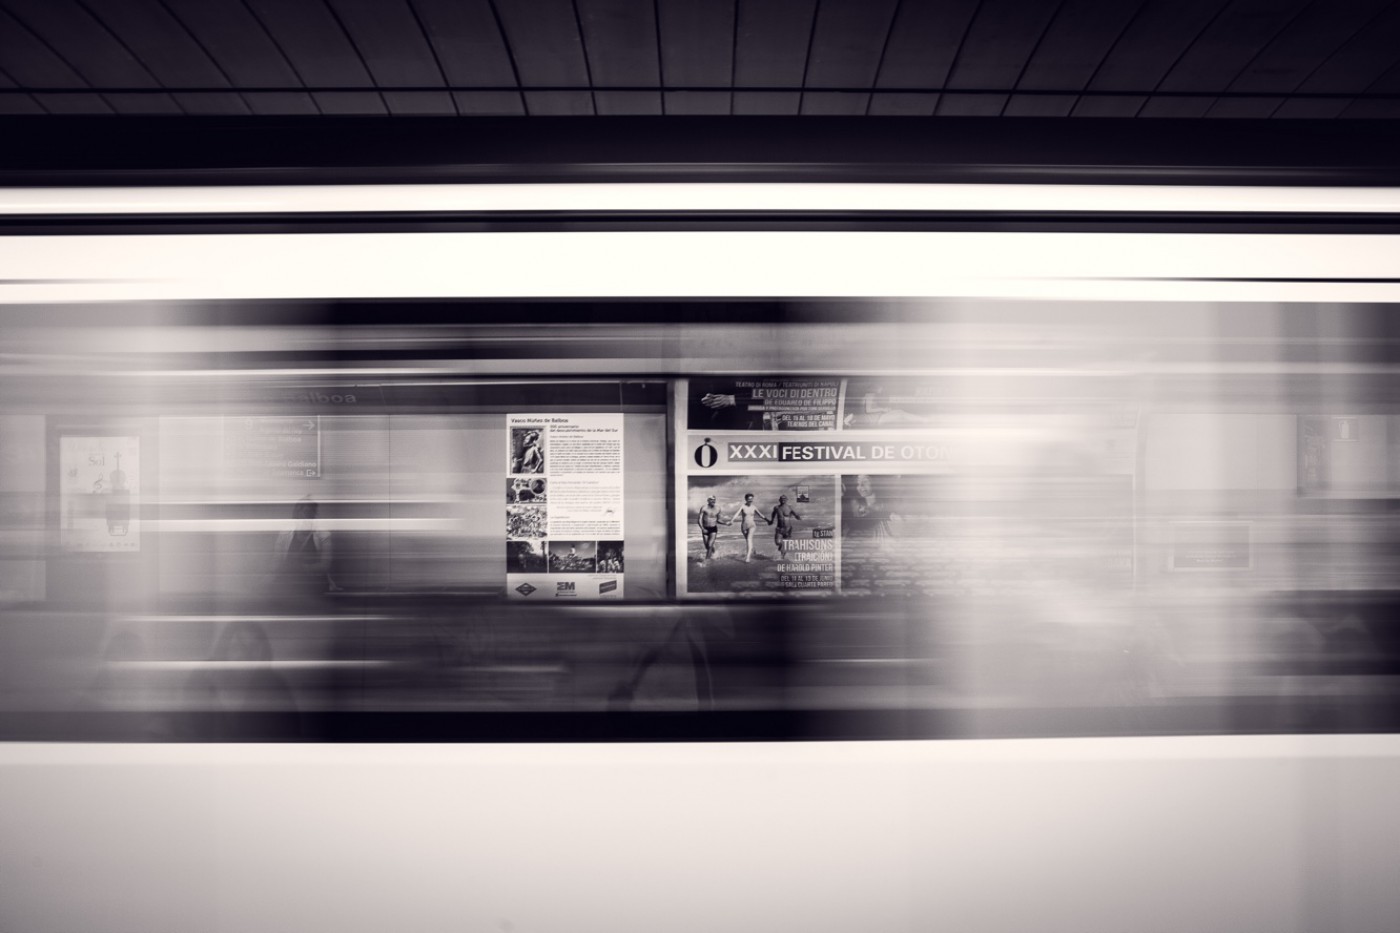 Black and white image of a blurred train going through a station